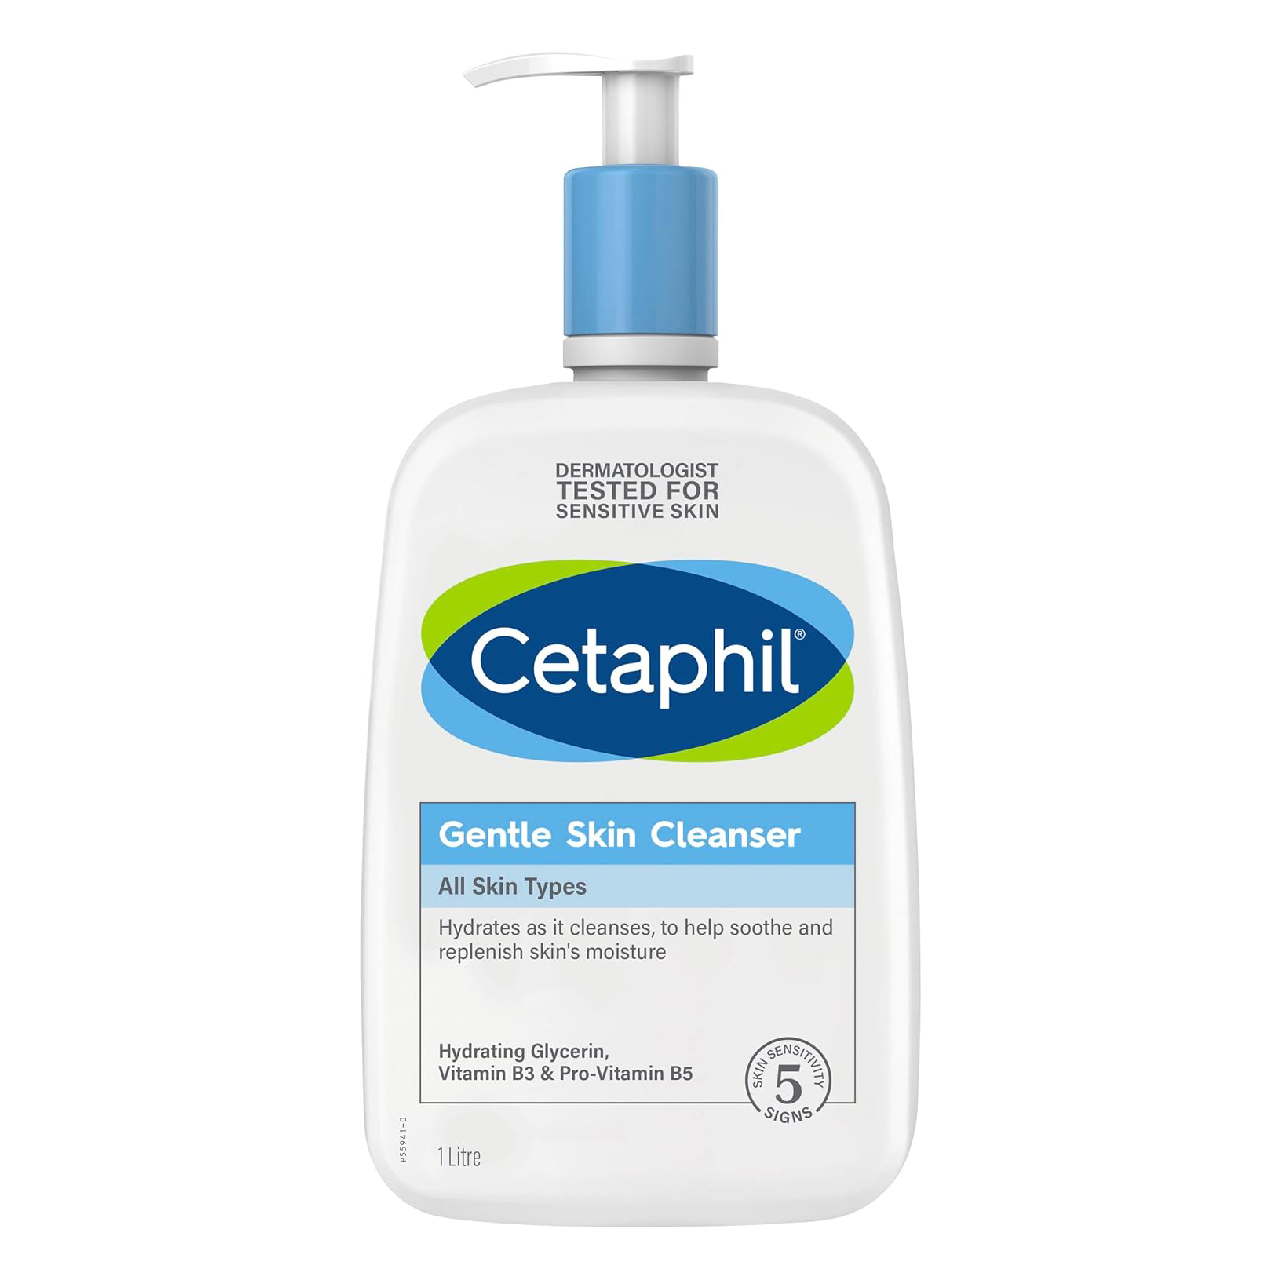 Bottle of Cetaphil Gentle Skin Cleanser on a white background